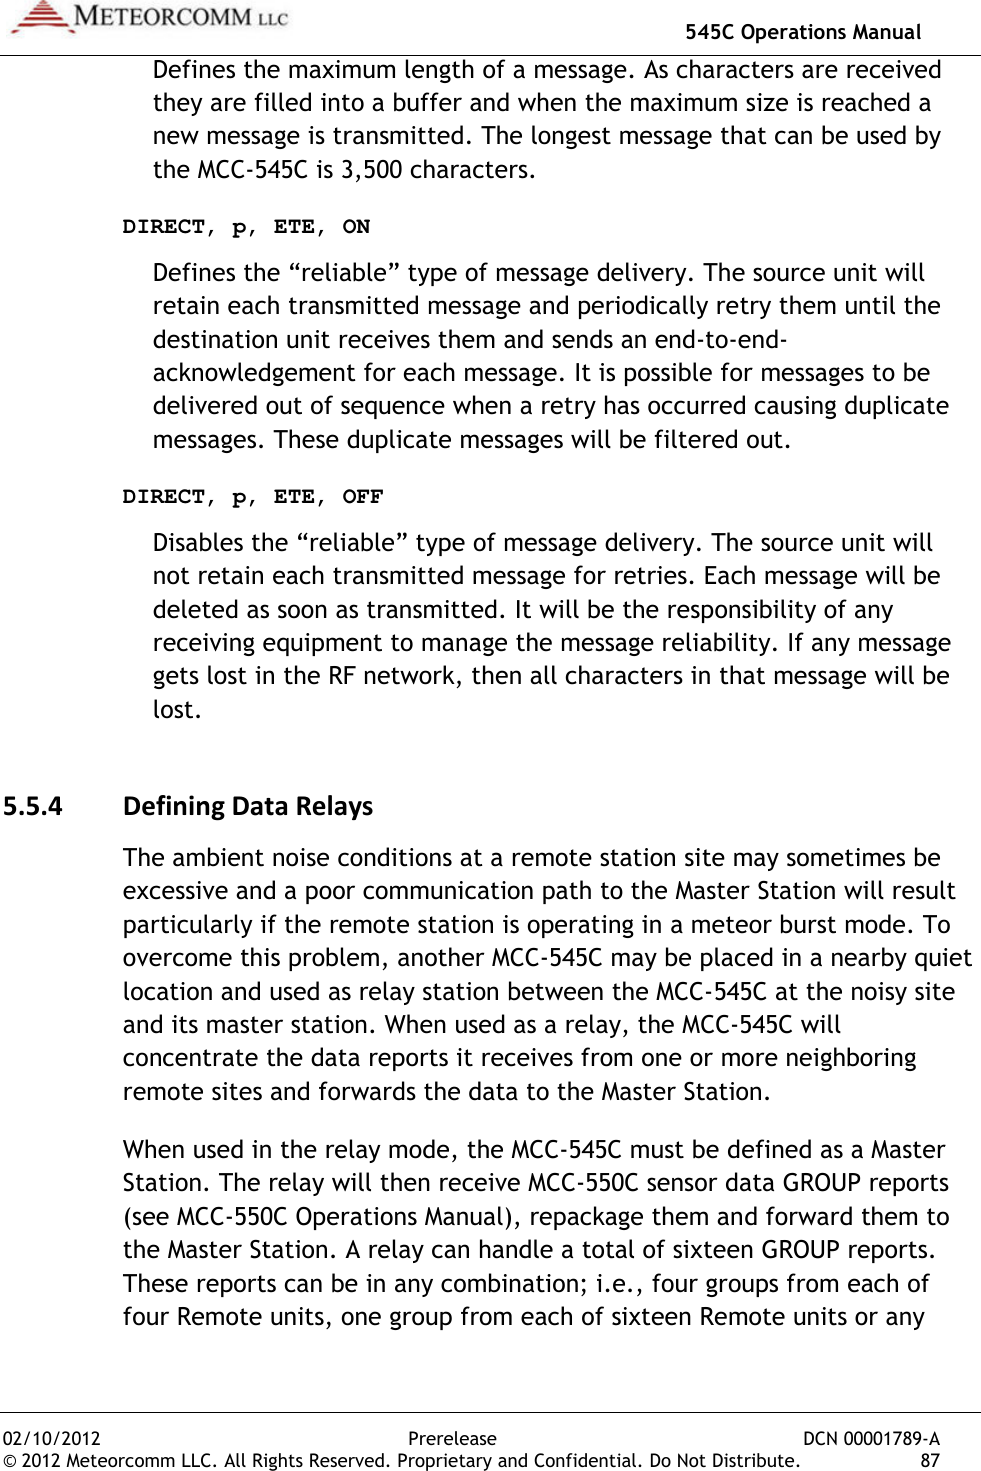   545C Operations Manual 02/10/2012  Prerelease  DCN 00001789-A © 2012 Meteorcomm LLC. All Rights Reserved. Proprietary and Confidential. Do Not Distribute.  87 Defines the maximum length of a message. As characters are received they are filled into a buffer and when the maximum size is reached a new message is transmitted. The longest message that can be used by the MCC-545C is 3,500 characters. DIRECT, p, ETE, ON Defines the “reliable” type of message delivery. The source unit will retain each transmitted message and periodically retry them until the destination unit receives them and sends an end-to-end-acknowledgement for each message. It is possible for messages to be delivered out of sequence when a retry has occurred causing duplicate messages. These duplicate messages will be filtered out. DIRECT, p, ETE, OFF Disables the “reliable” type of message delivery. The source unit will not retain each transmitted message for retries. Each message will be deleted as soon as transmitted. It will be the responsibility of any receiving equipment to manage the message reliability. If any message gets lost in the RF network, then all characters in that message will be lost. 5.5.4 Defining Data Relays The ambient noise conditions at a remote station site may sometimes be excessive and a poor communication path to the Master Station will result particularly if the remote station is operating in a meteor burst mode. To overcome this problem, another MCC-545C may be placed in a nearby quiet location and used as relay station between the MCC-545C at the noisy site and its master station. When used as a relay, the MCC-545C will concentrate the data reports it receives from one or more neighboring remote sites and forwards the data to the Master Station. When used in the relay mode, the MCC-545C must be defined as a Master Station. The relay will then receive MCC-550C sensor data GROUP reports (see MCC-550C Operations Manual), repackage them and forward them to the Master Station. A relay can handle a total of sixteen GROUP reports. These reports can be in any combination; i.e., four groups from each of four Remote units, one group from each of sixteen Remote units or any 